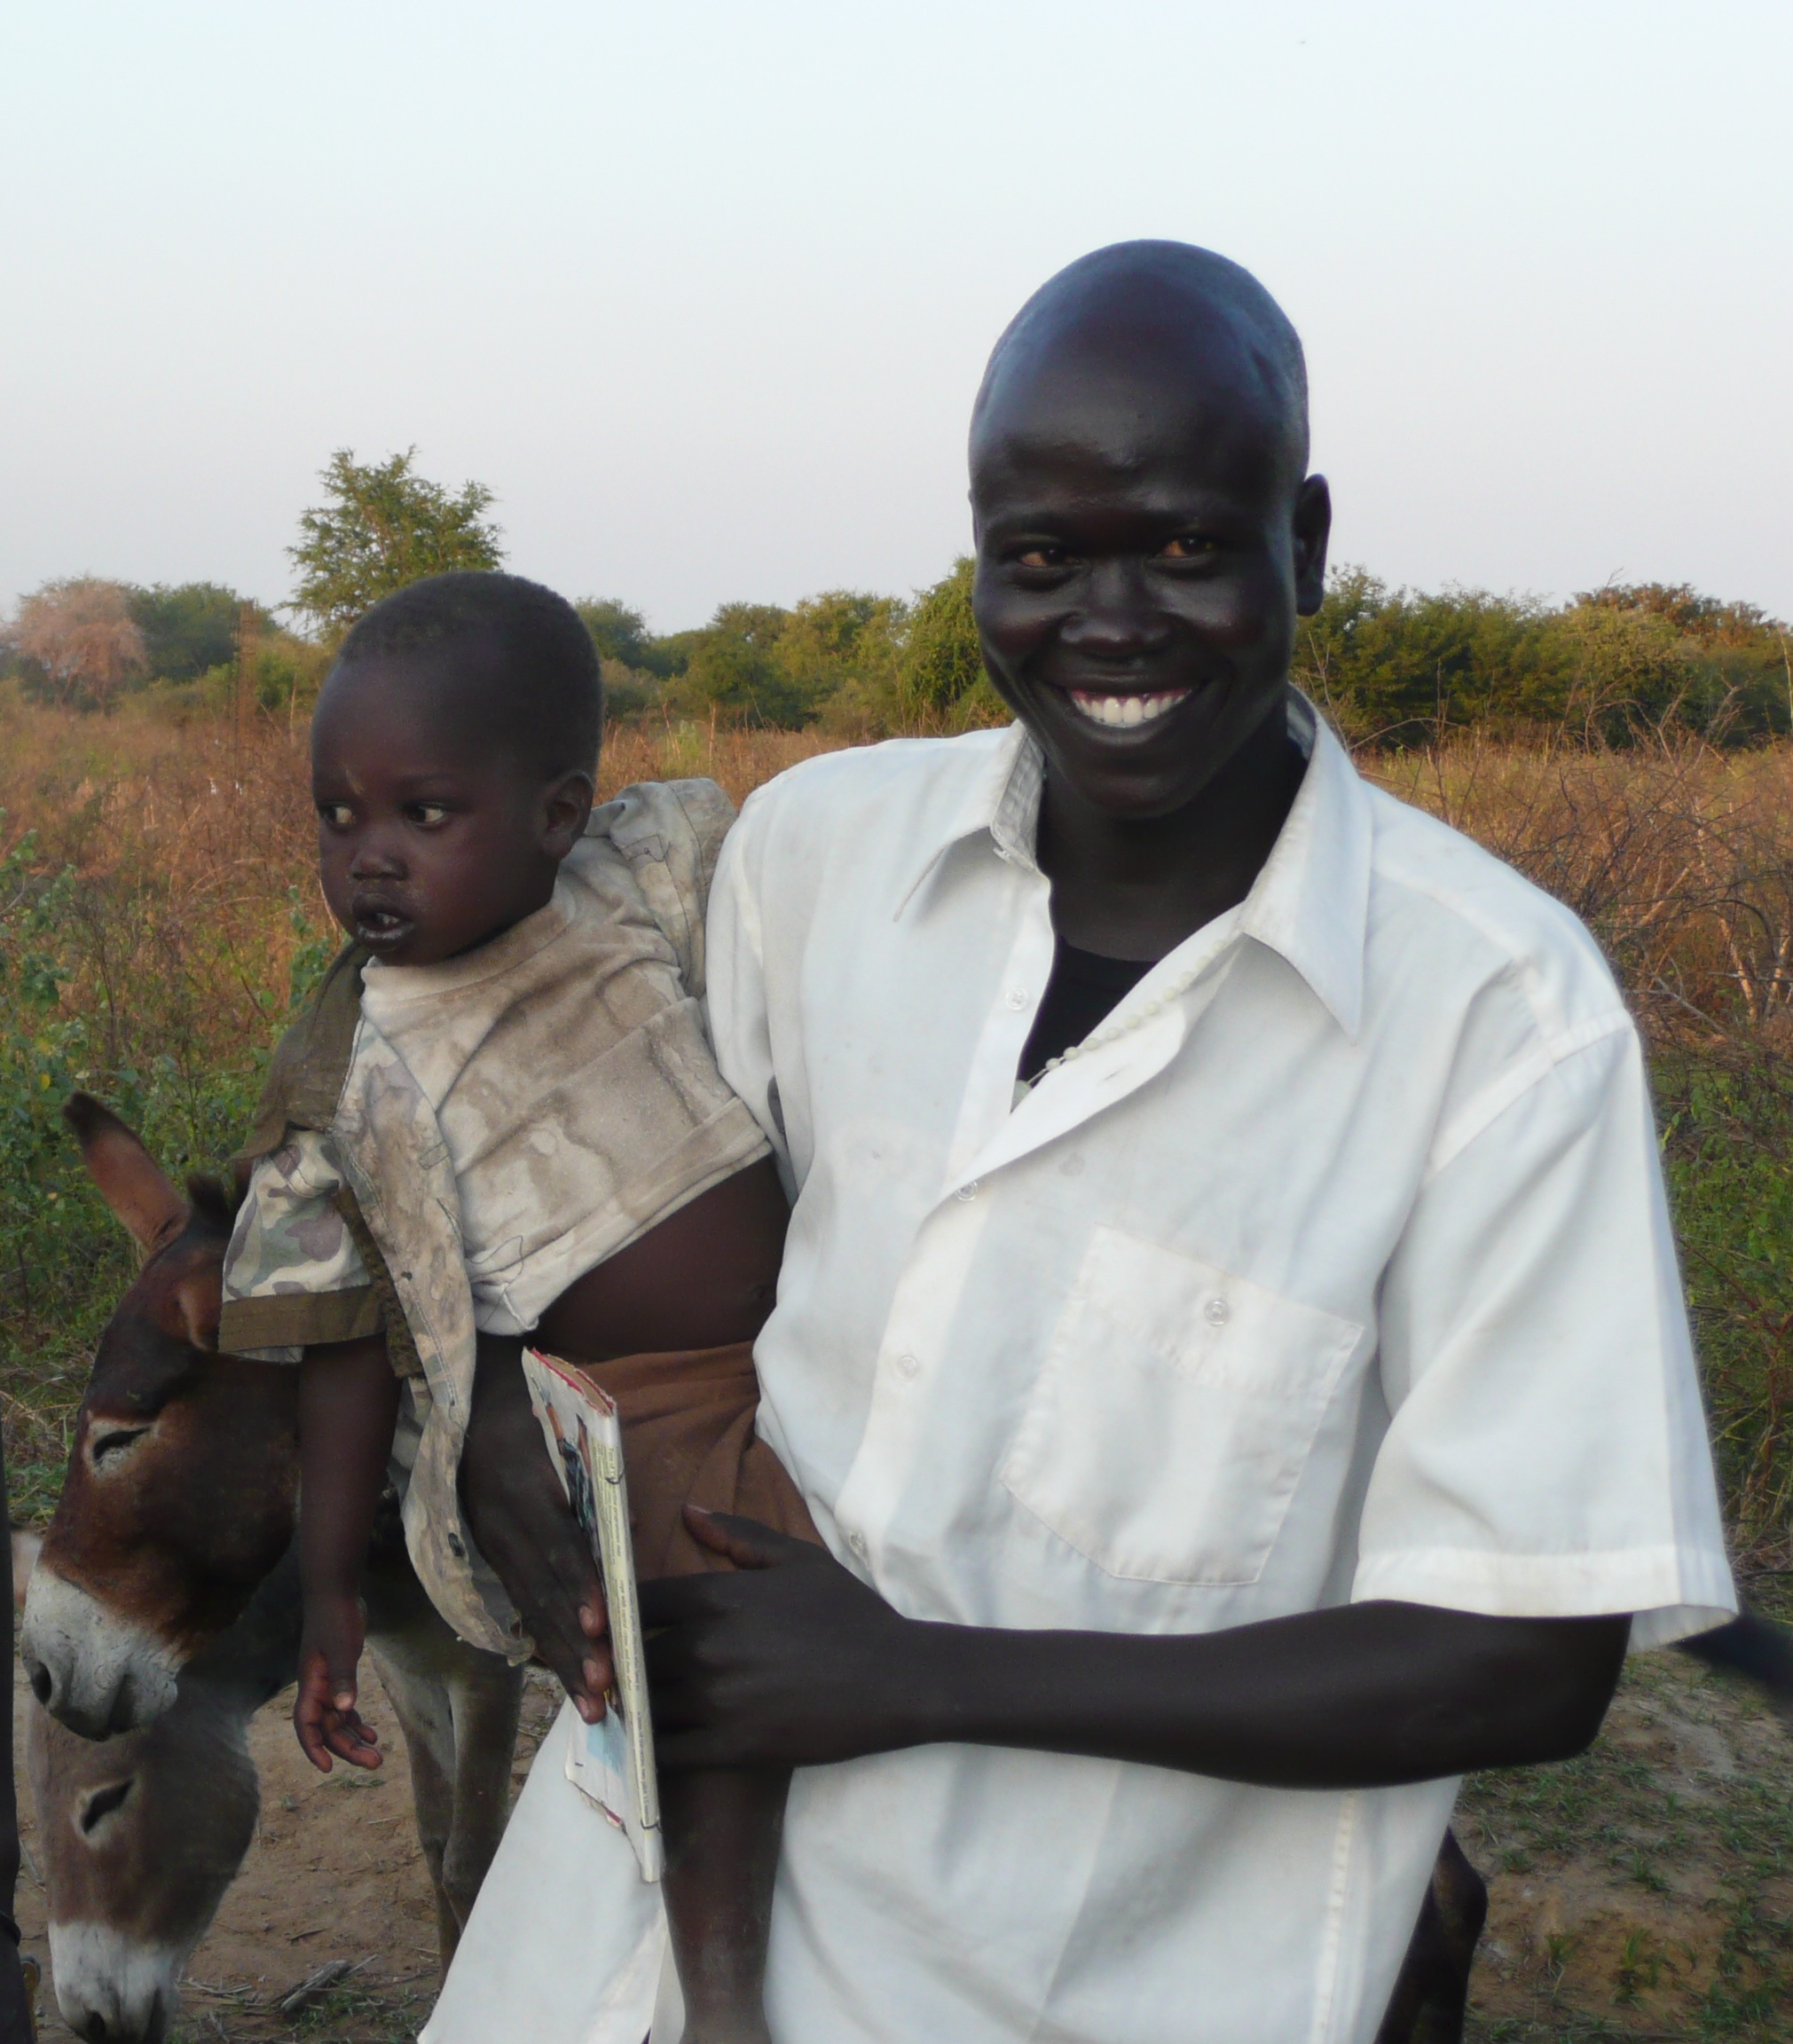 South Sudan is a nation in need with the people the people continuing to endure severe hardships.